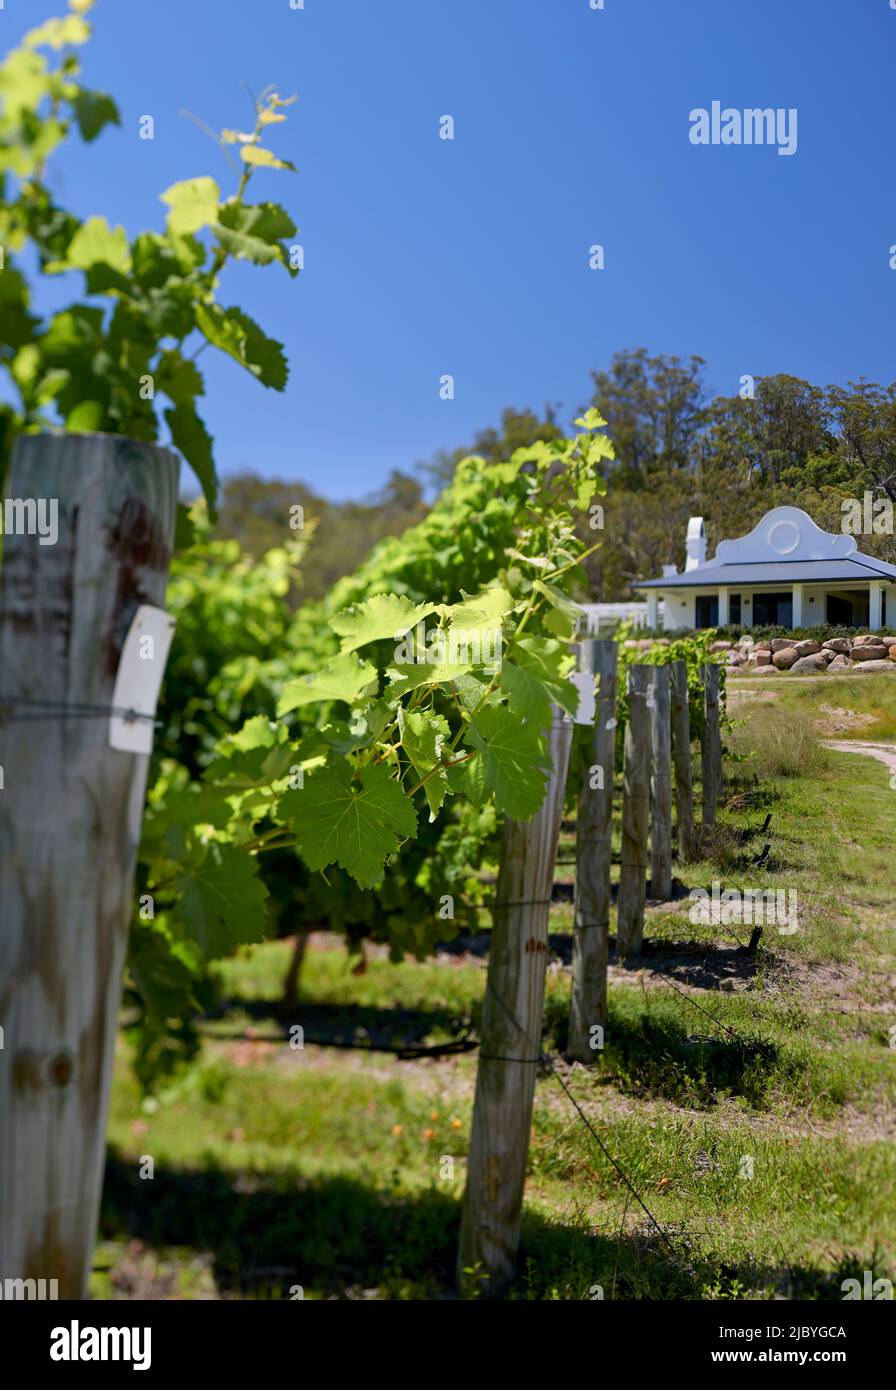 View across vineyard looking towards homestead and native trees behind Stock Photo